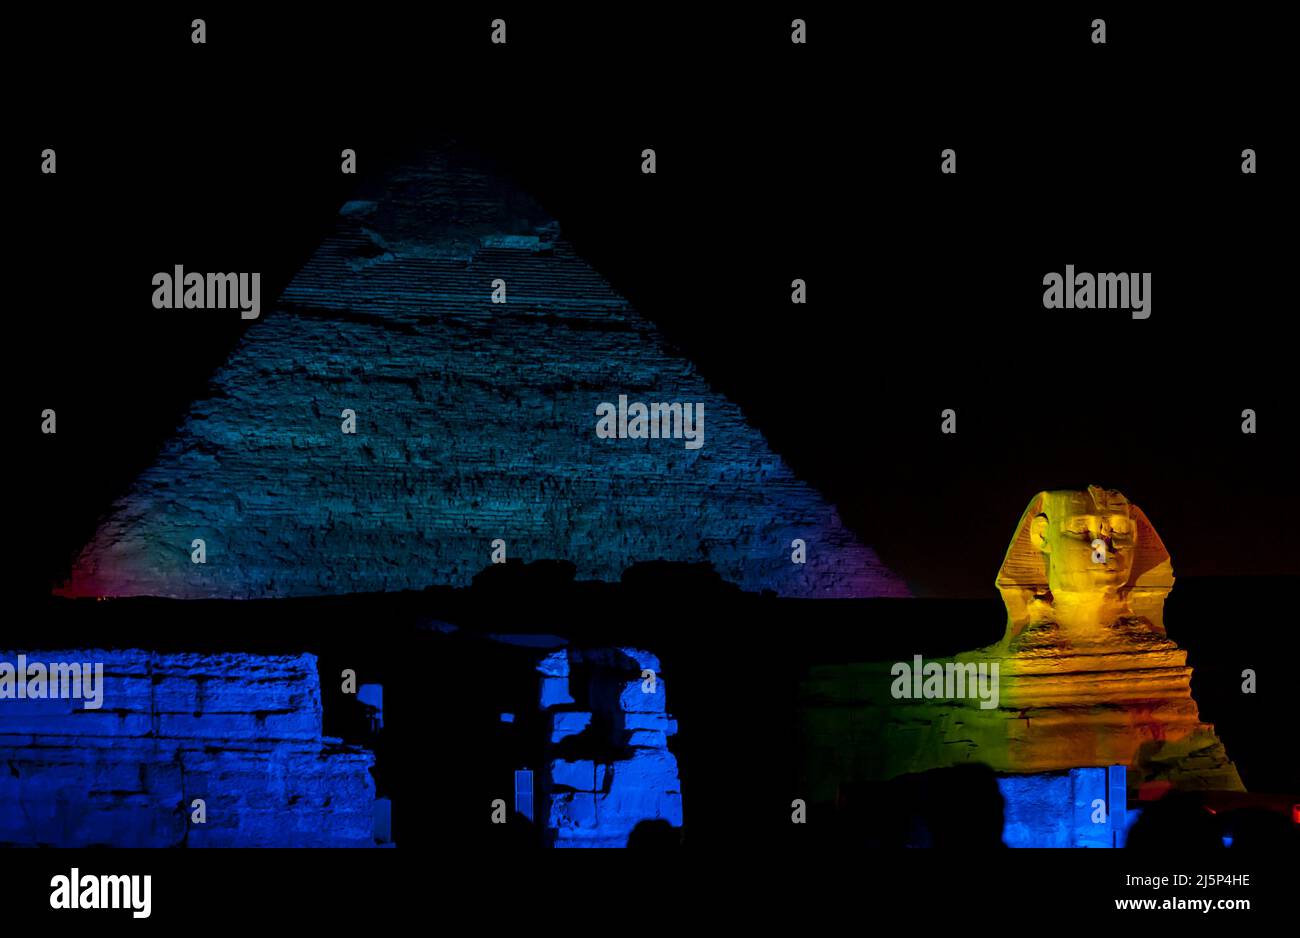 The Pyramid of Khafre and the Great Sphinx illuminated during the Pyramids Sound & Light show on the Giza plateau at Cairo in Egypt. Stock Photo